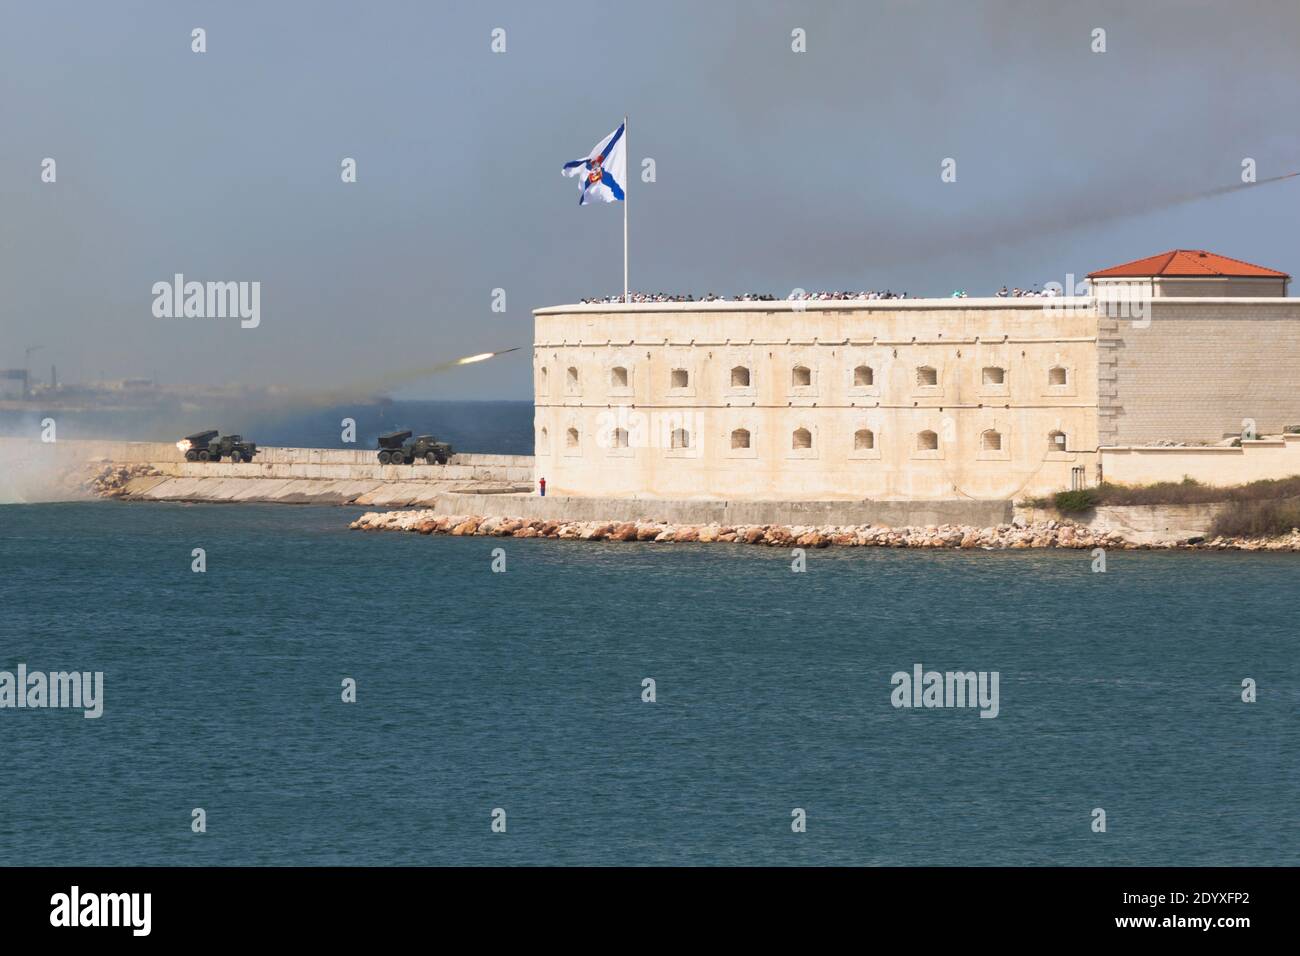 Sevastopol, Crimea, Russia - July 26, 2020: Shooting from the Grad multiple launch rocket systems on Navy Day from the Northern Pier in the Hero City Stock Photo